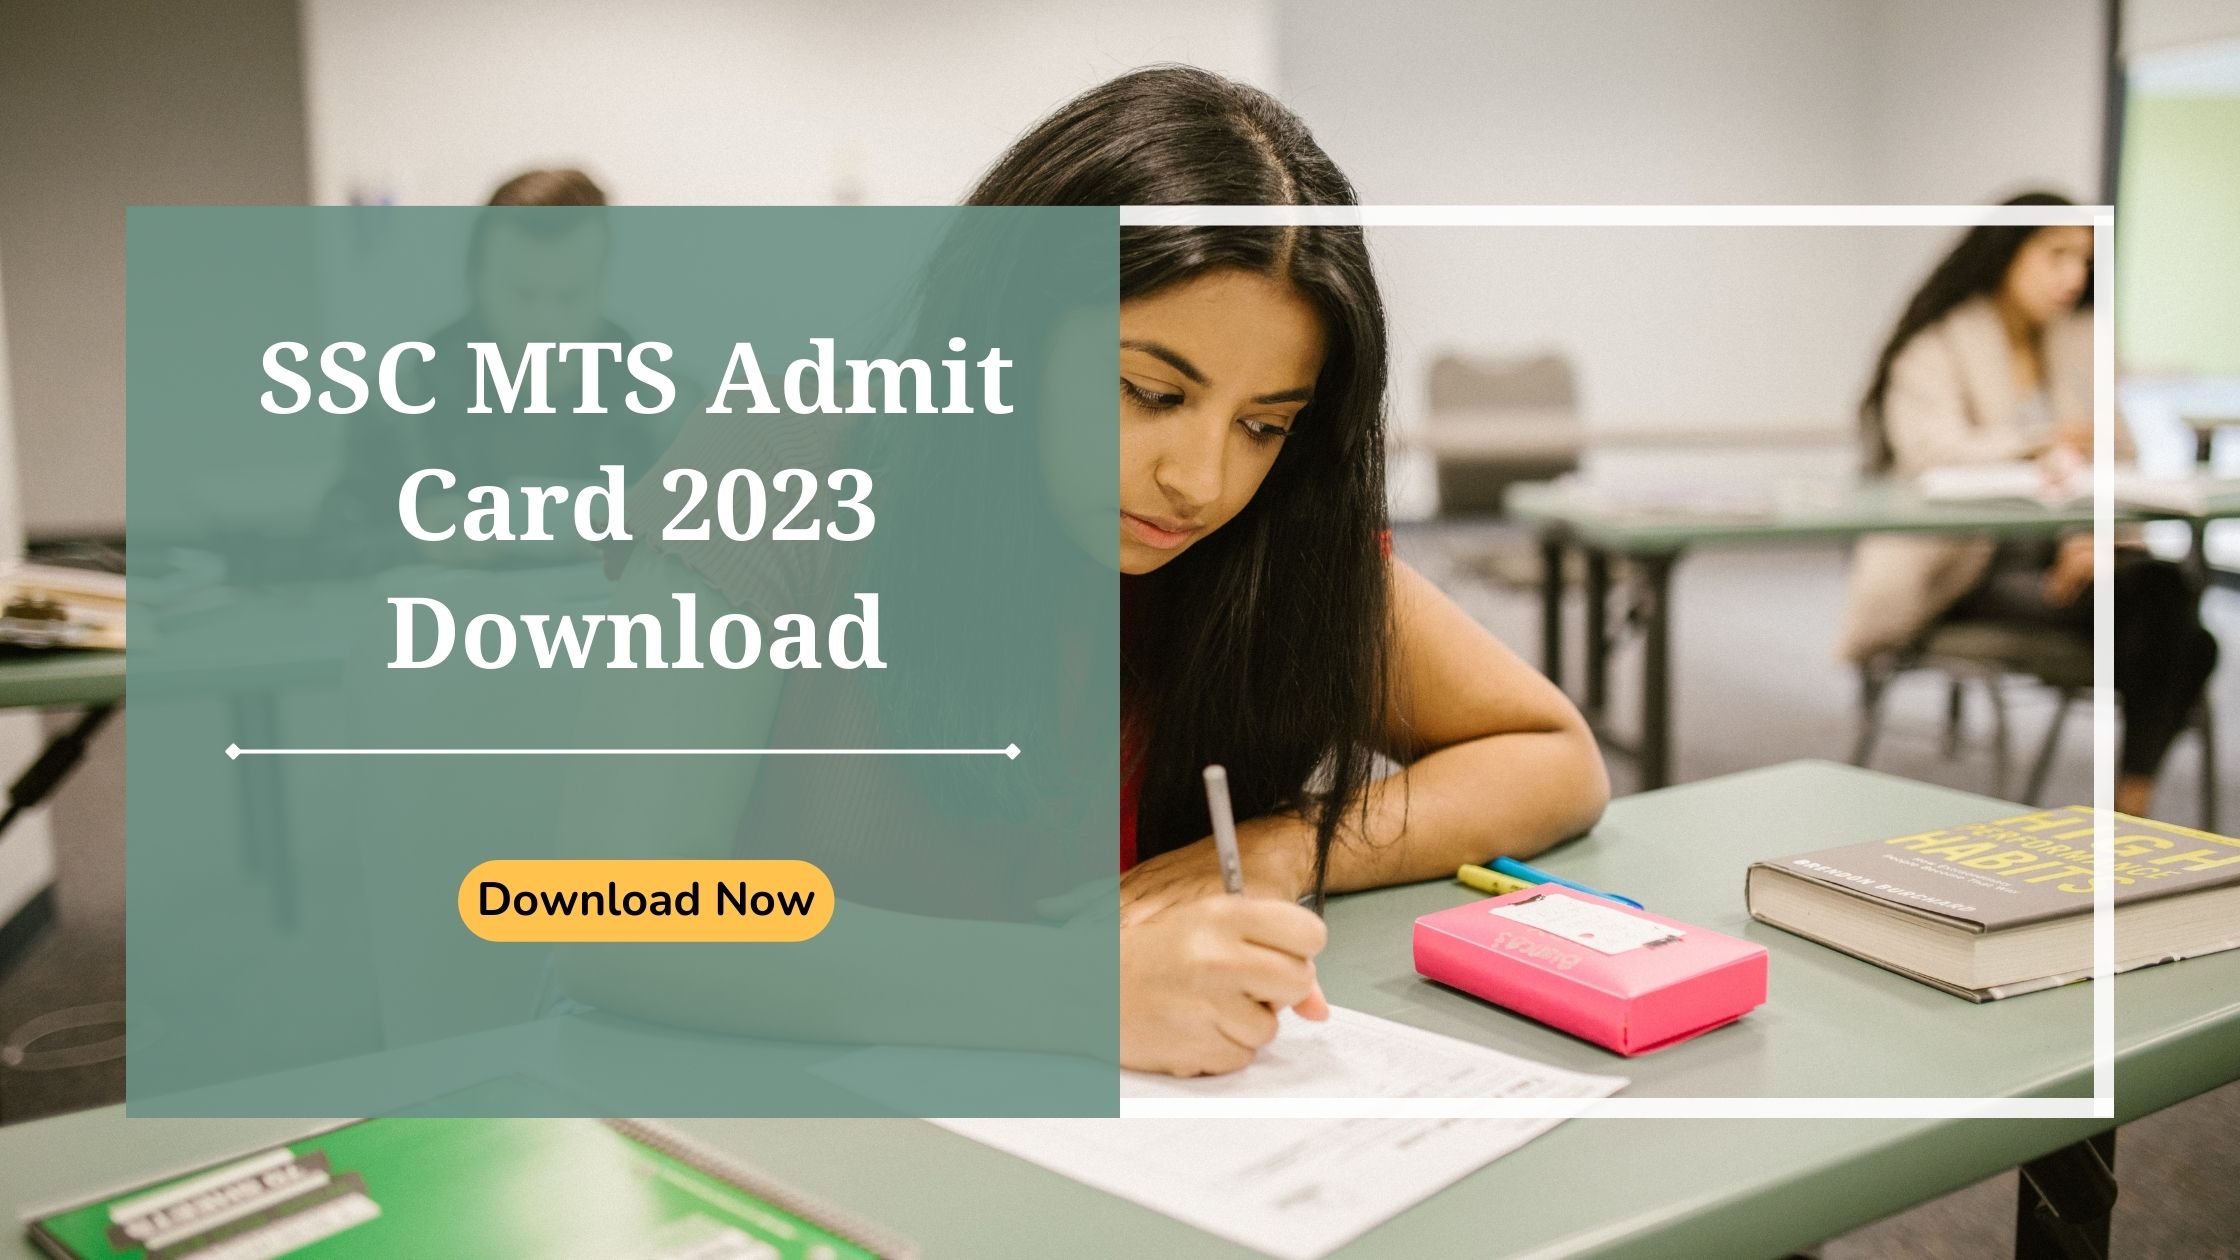 SSC MTS Admit Card 2023 Download Now